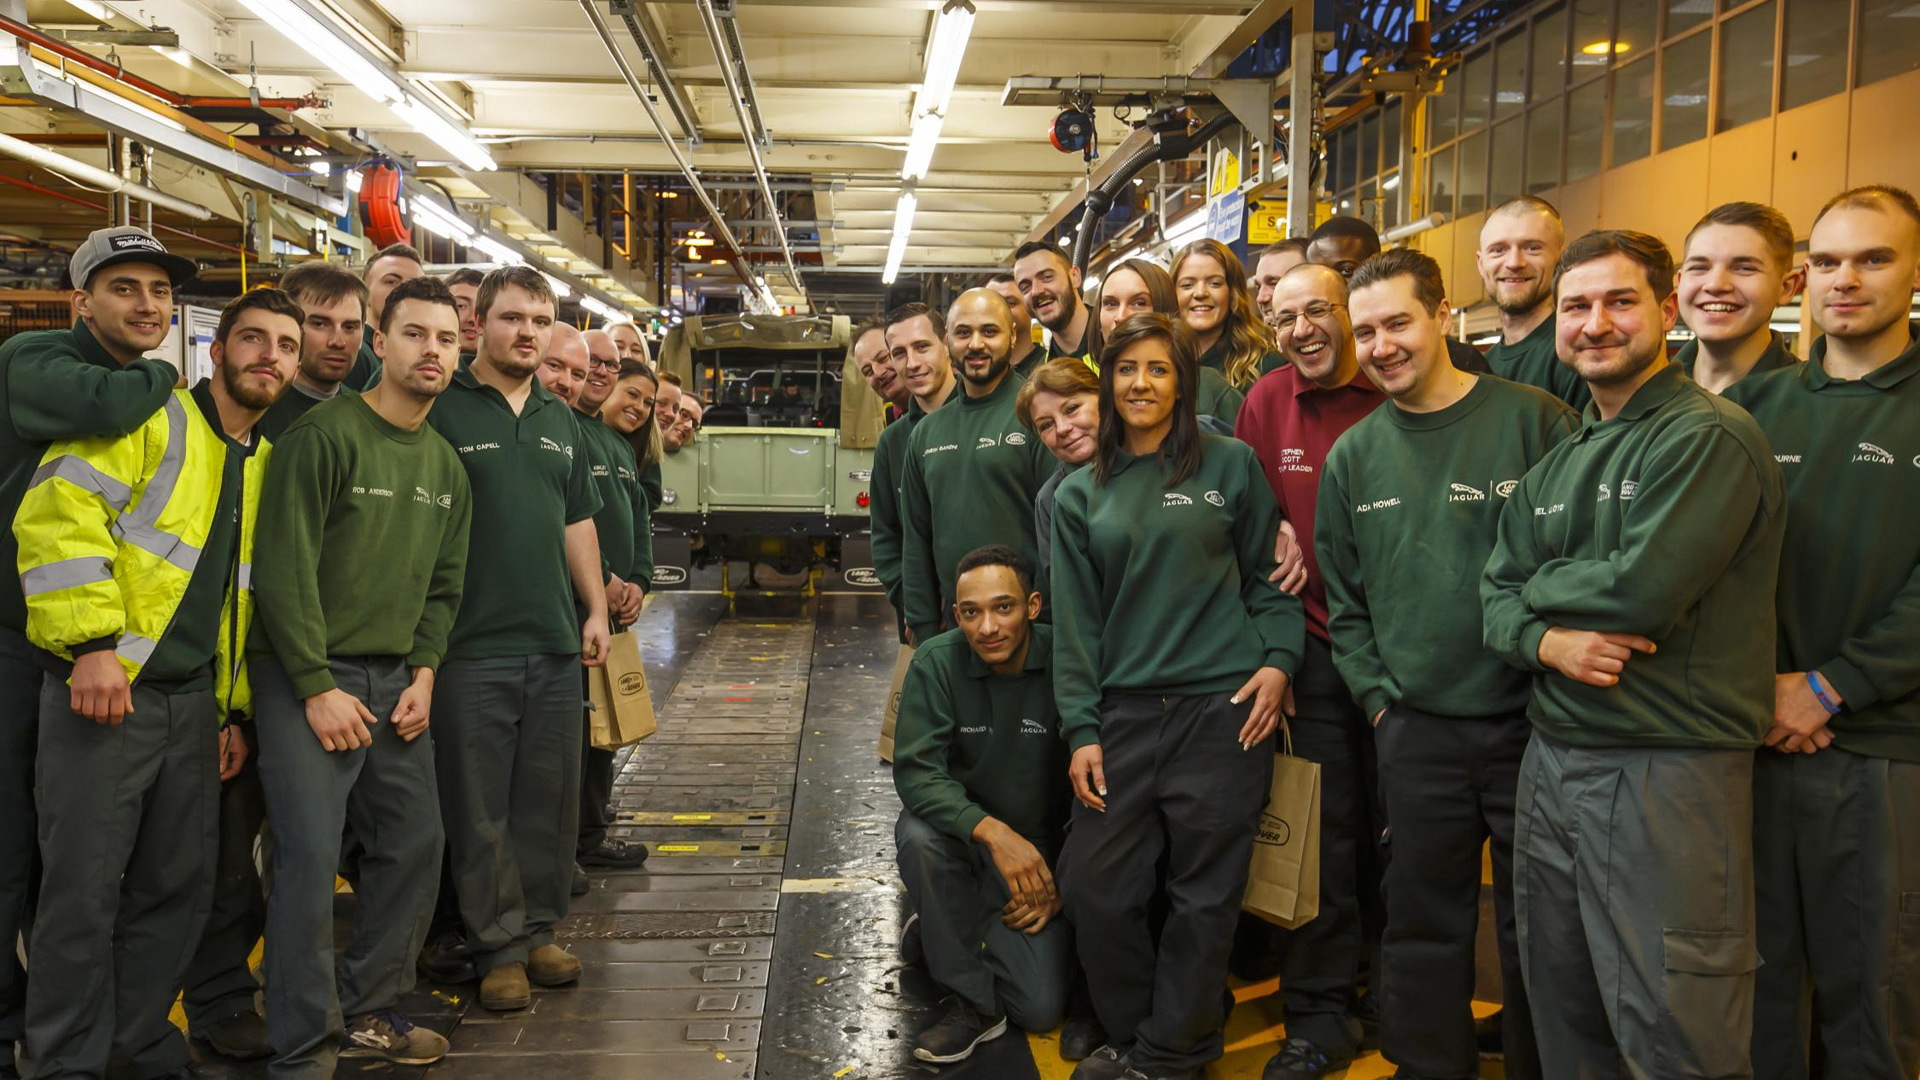 Last Land Rover Defender is built at famous Solihull plant in the United Kingdom - January 29, 2016